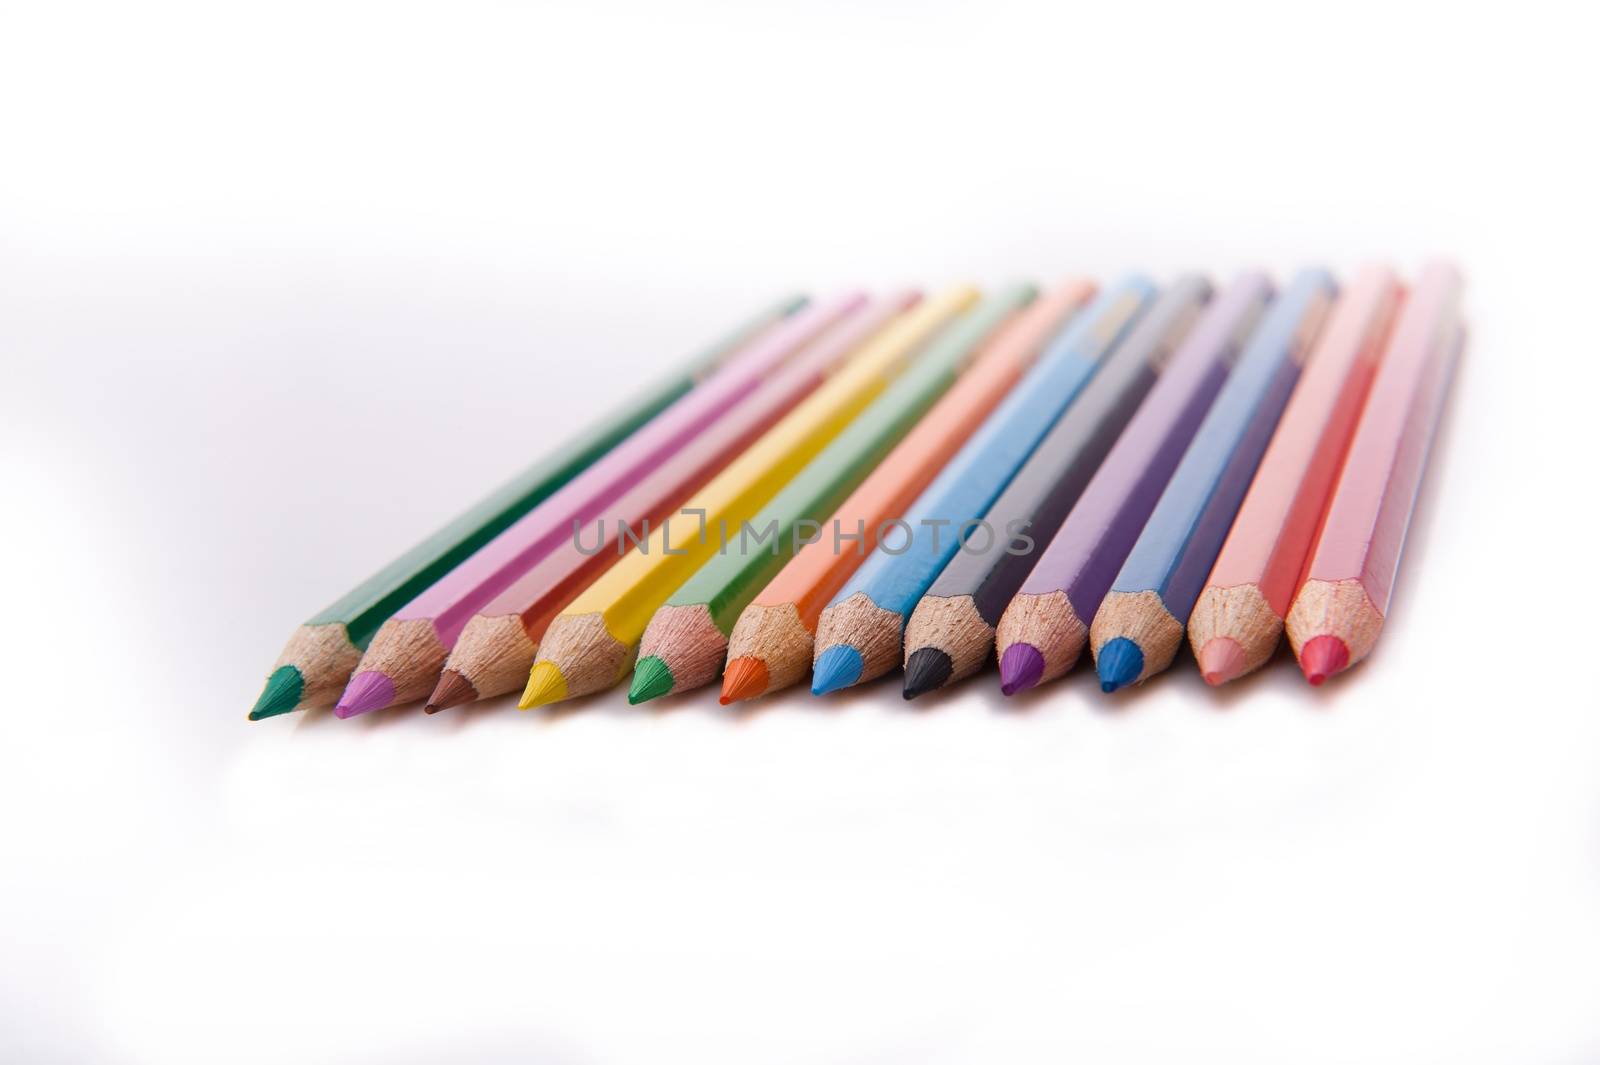 Horizontal shot of isolated on the white background row of colored pencils